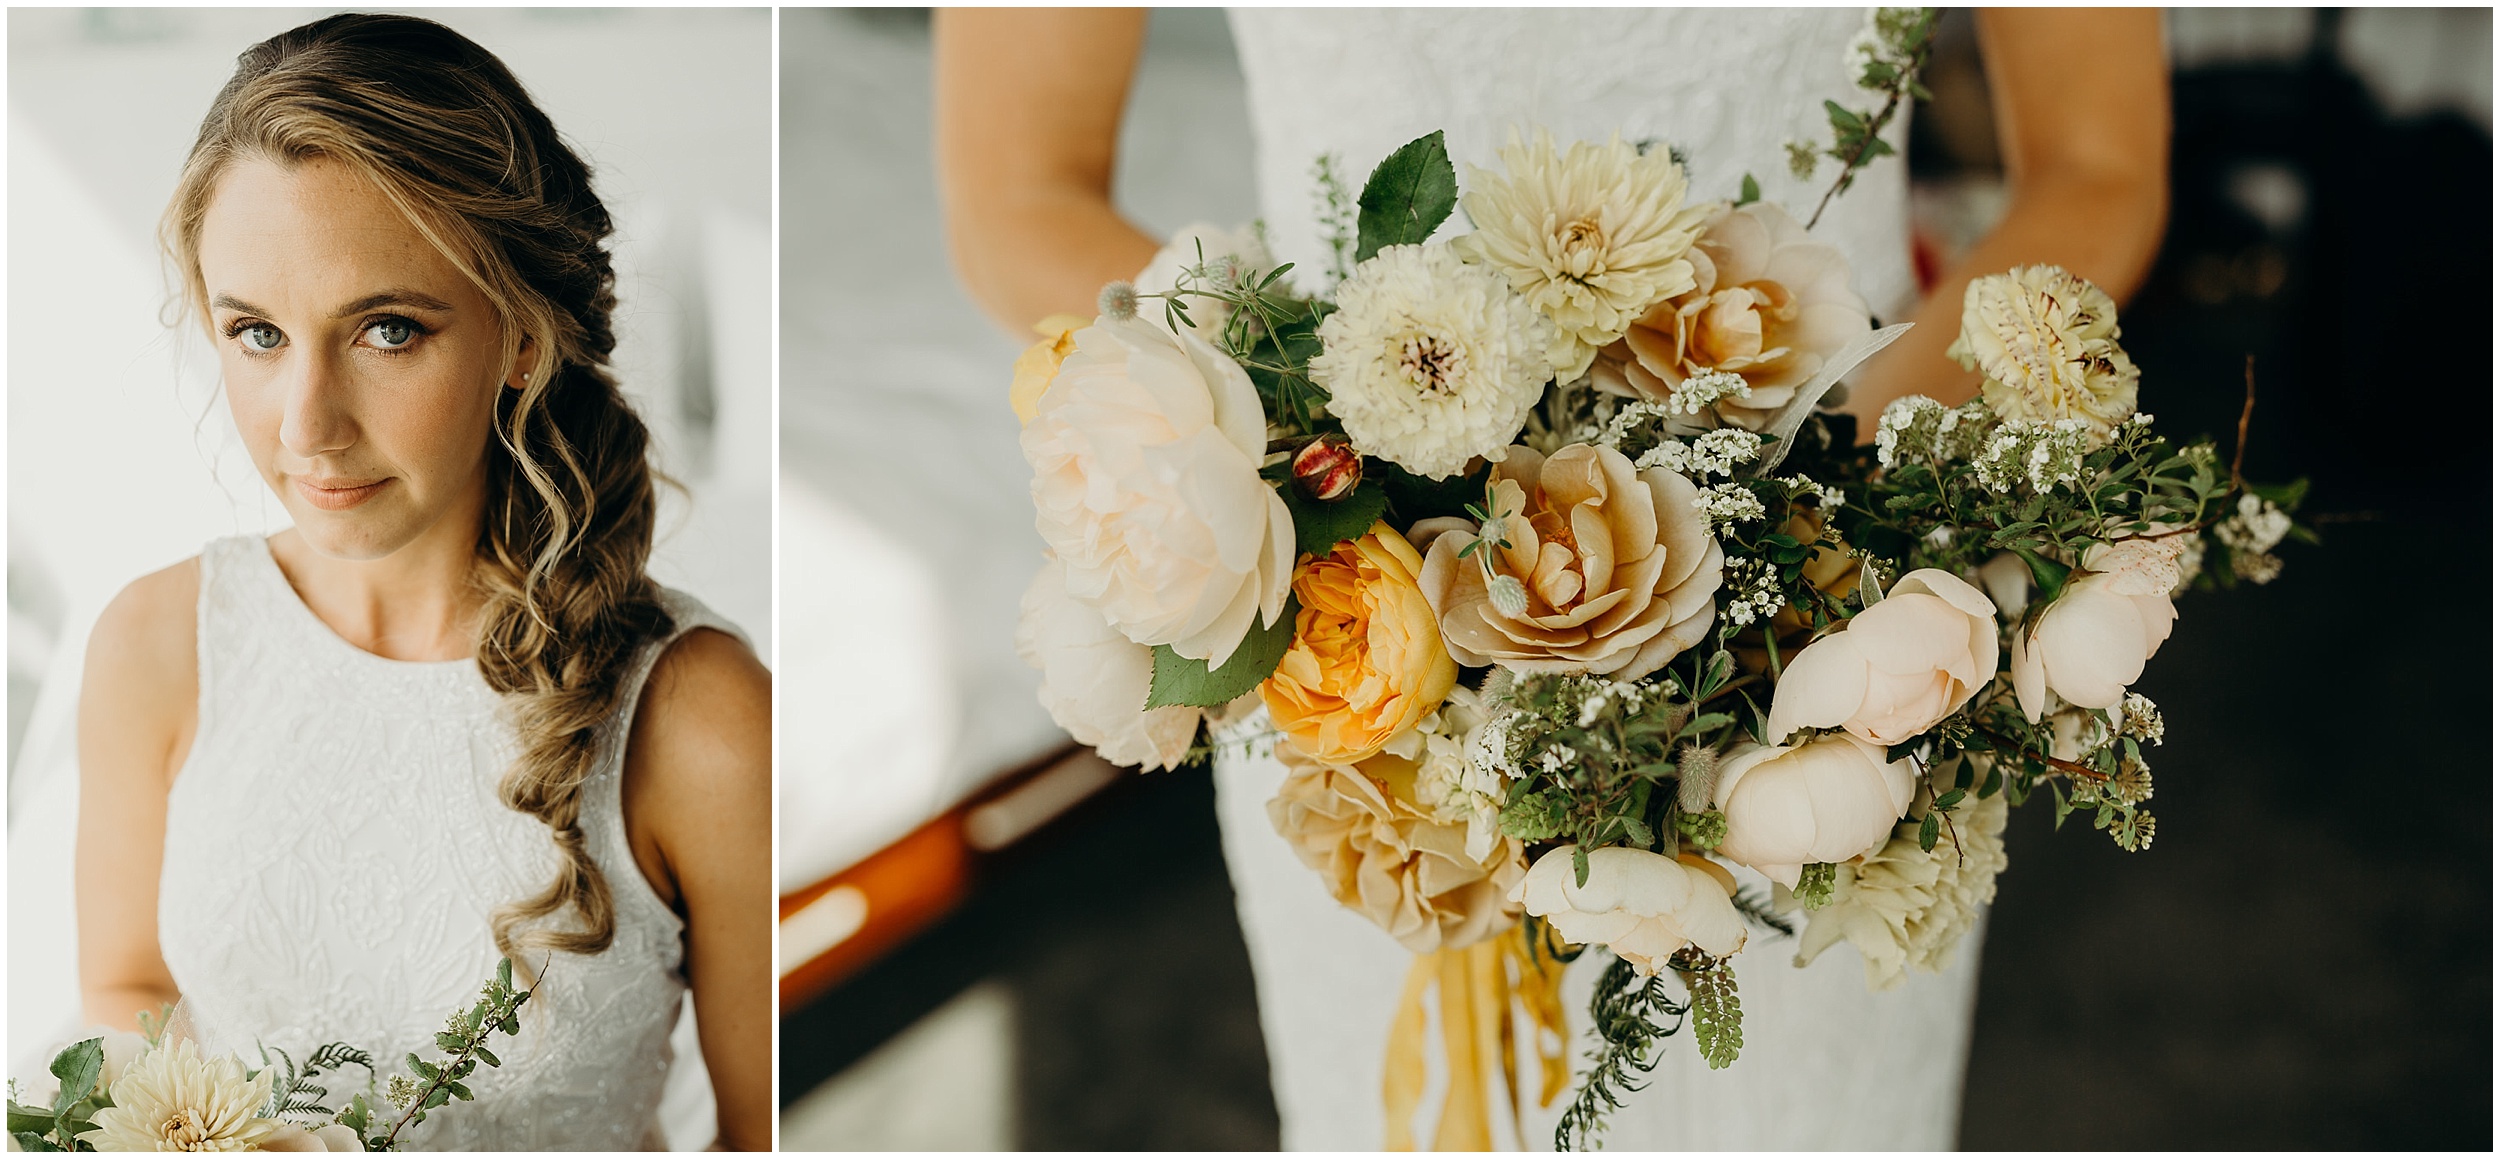 a portrait of the bride and her wedding flowers at the wythe hotel in brooklyn, new york city